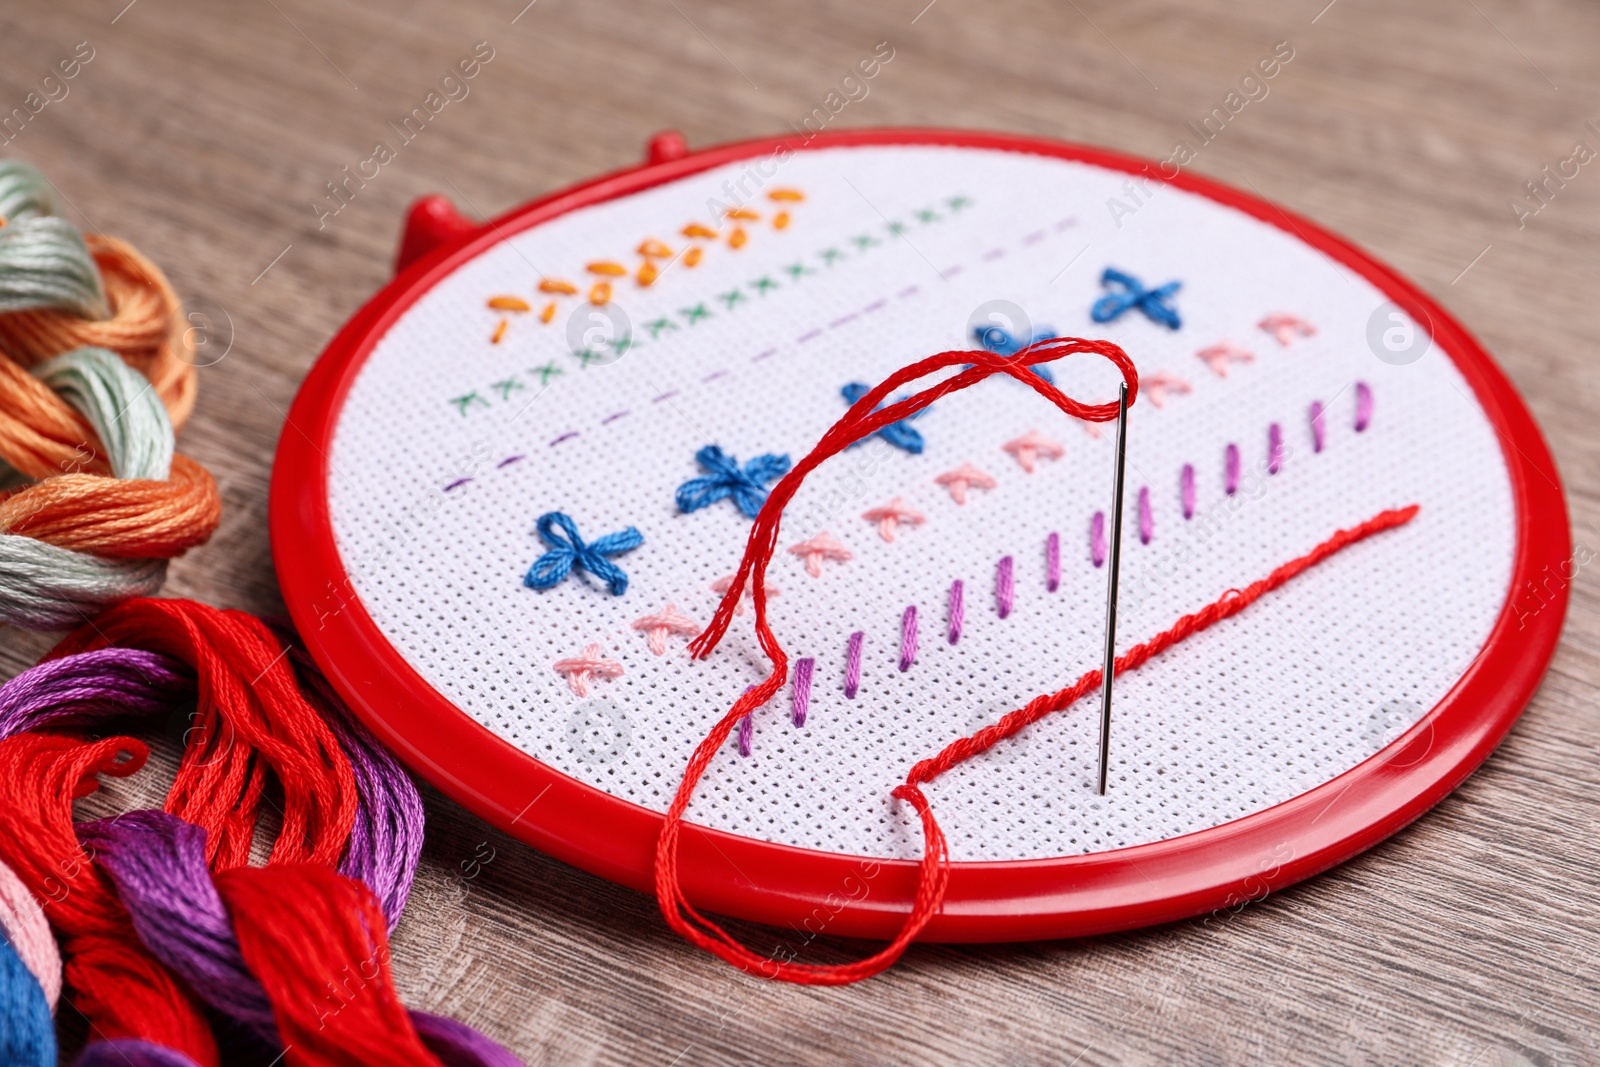 Photo of Embroidery hoop with fabric, needle and colorful floss set on wooden table, closeup